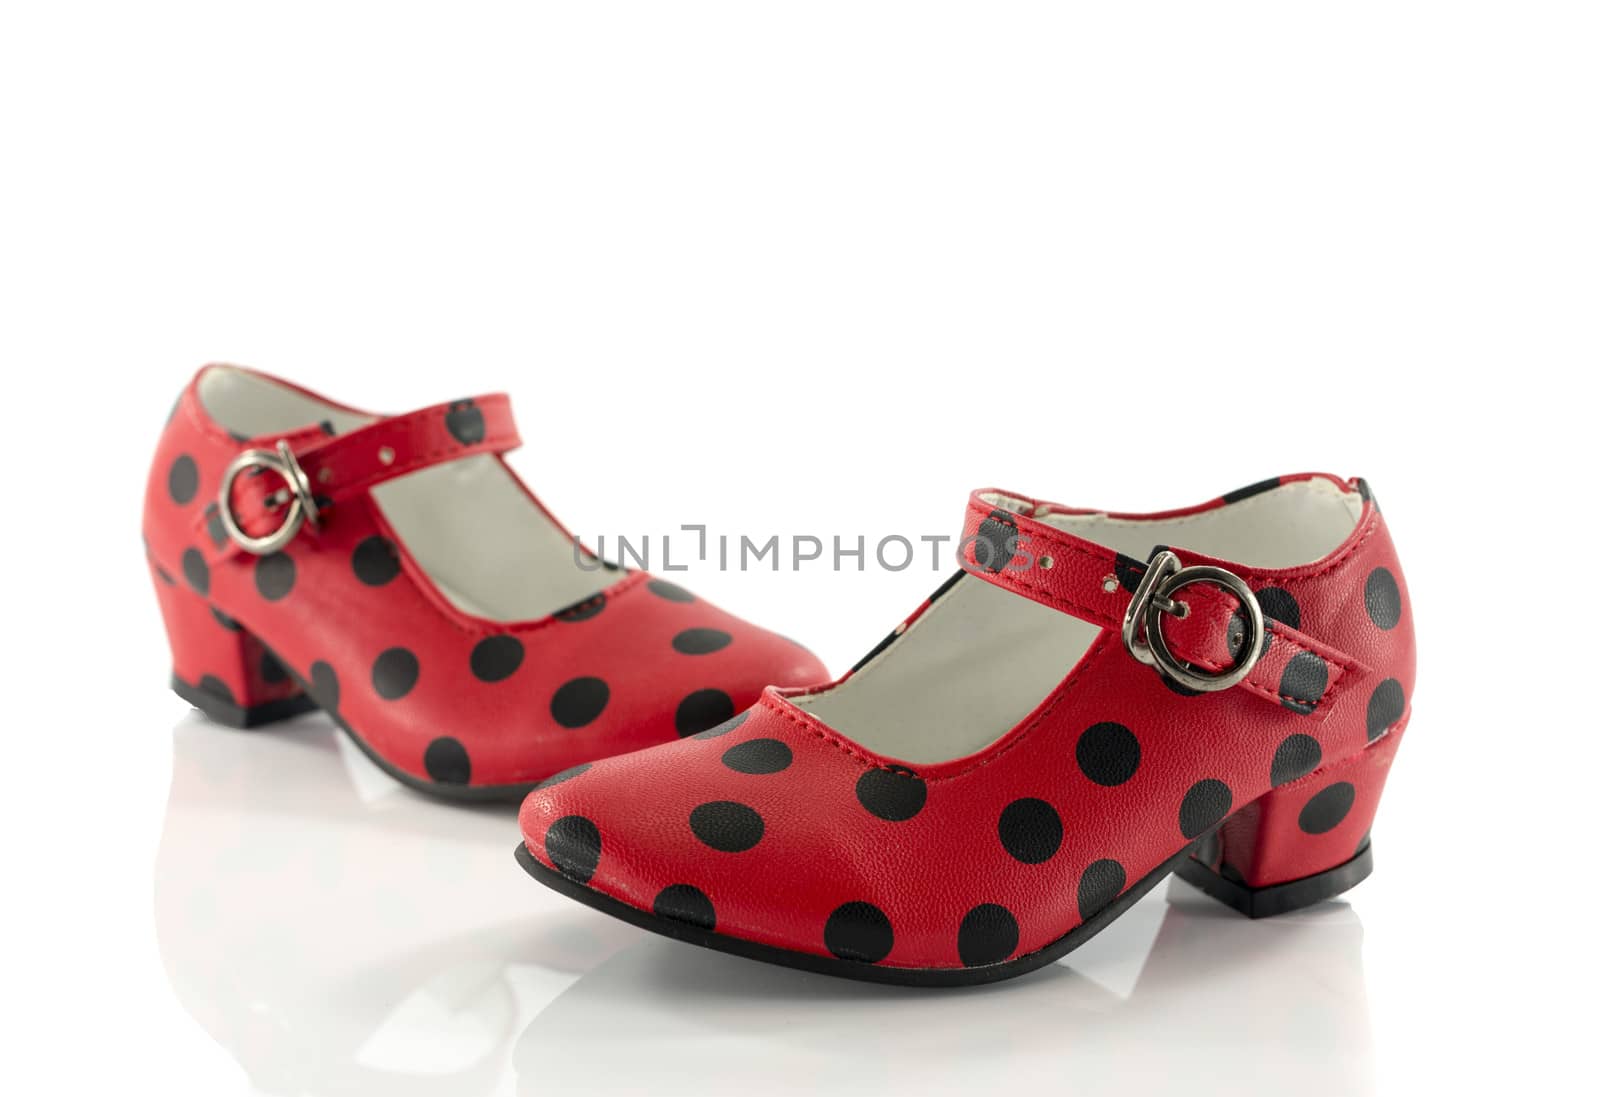 red shoes from back with black dots and white background